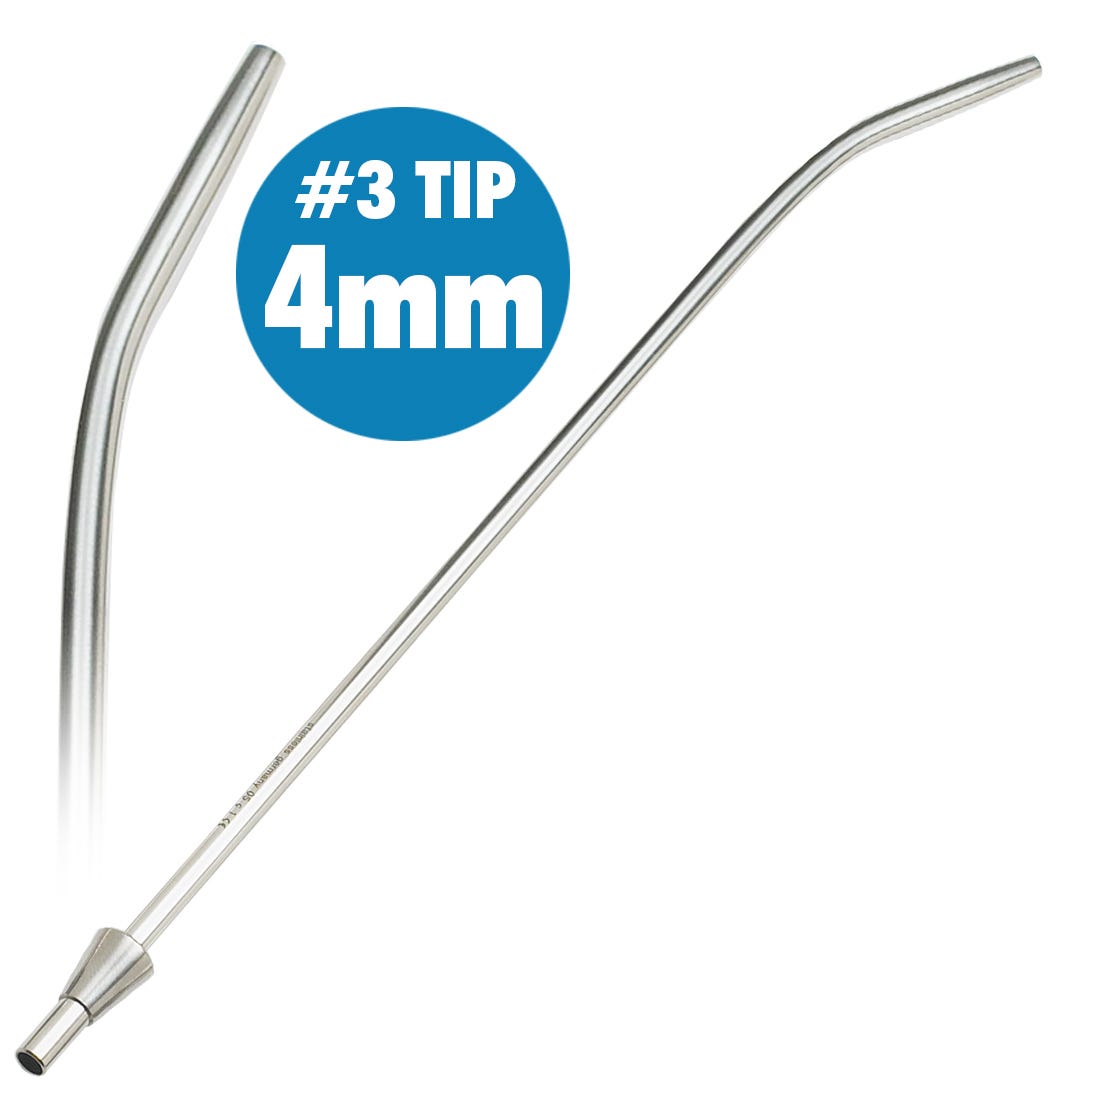 Suction Tip Size 3, 4mm opening